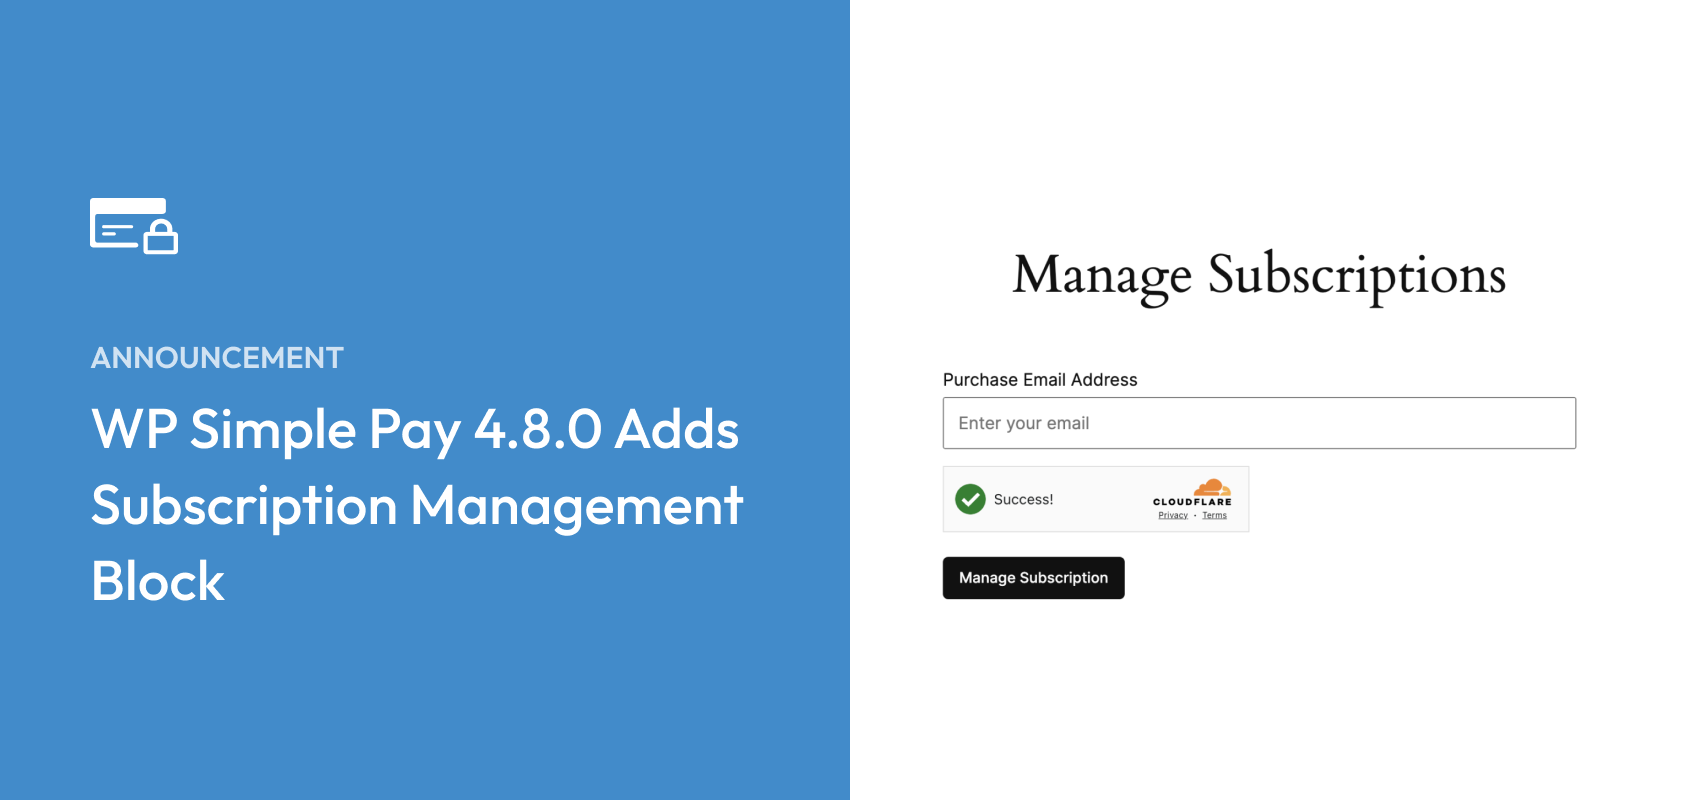 [New] Introducing WP Simple Pay 4.8.0 with Subscription Management Block